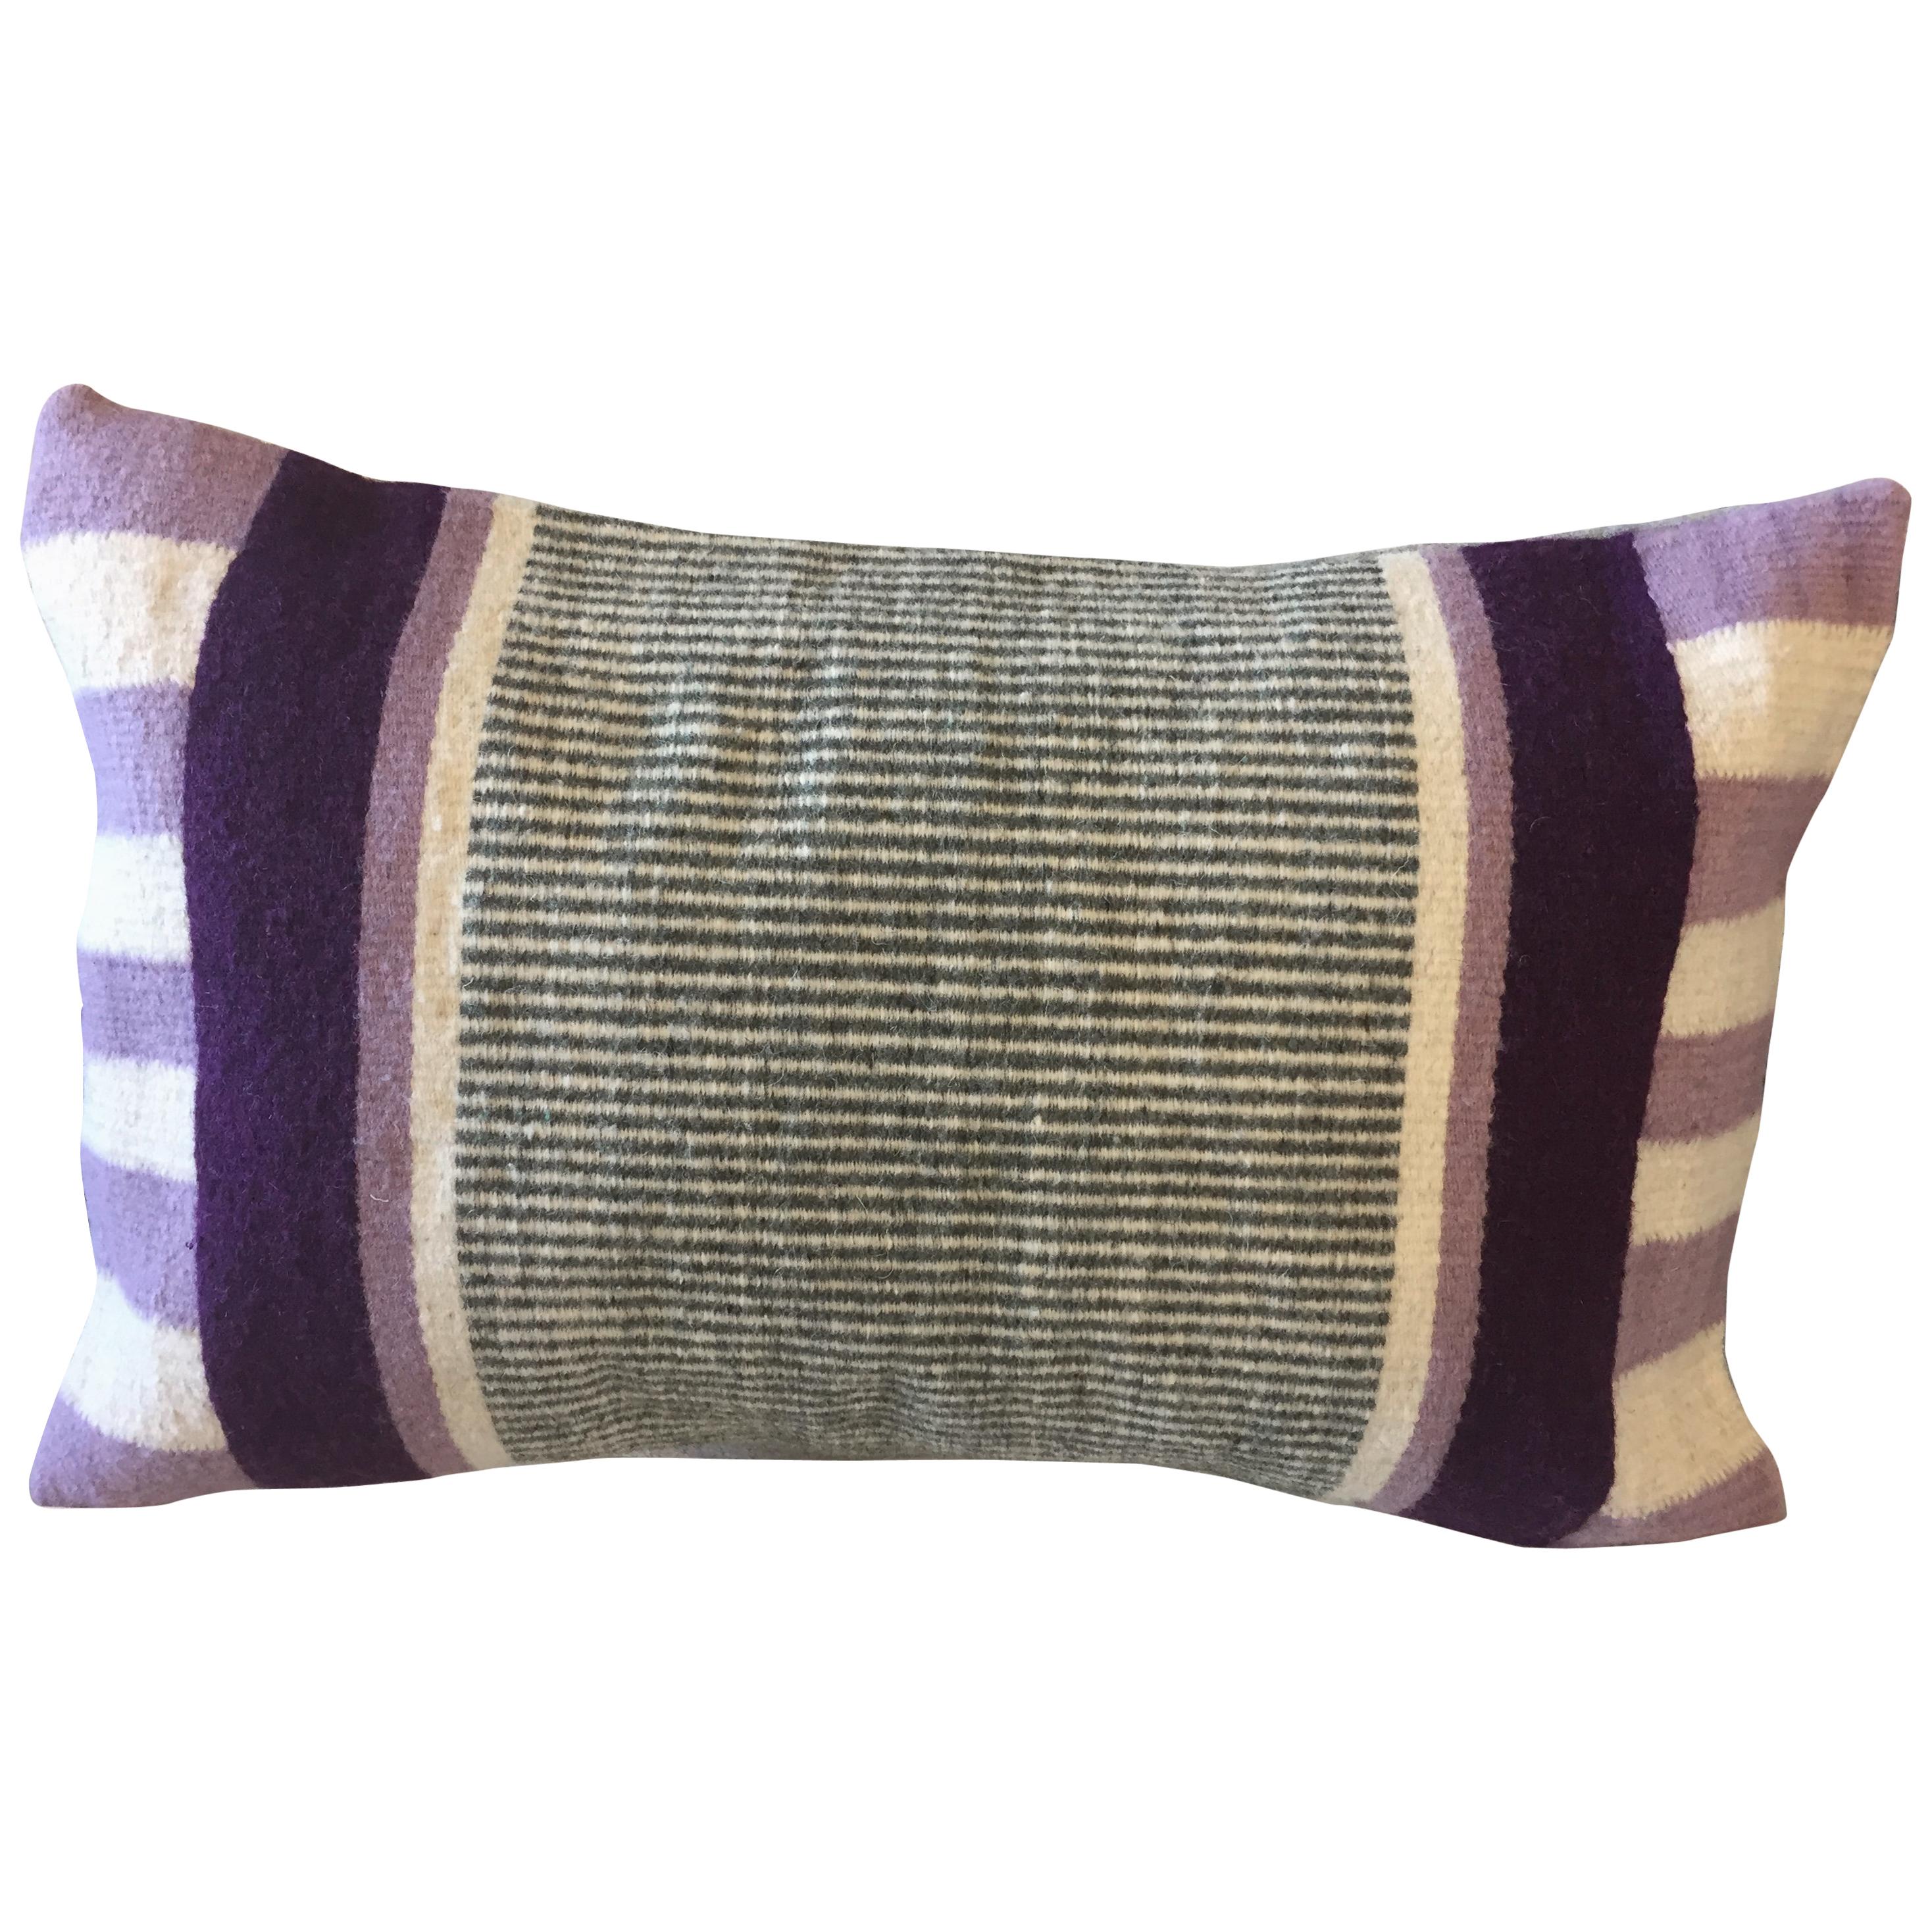 Handwoven Modern Organic Style Wool Throw Pillow with Stripes, in Stock